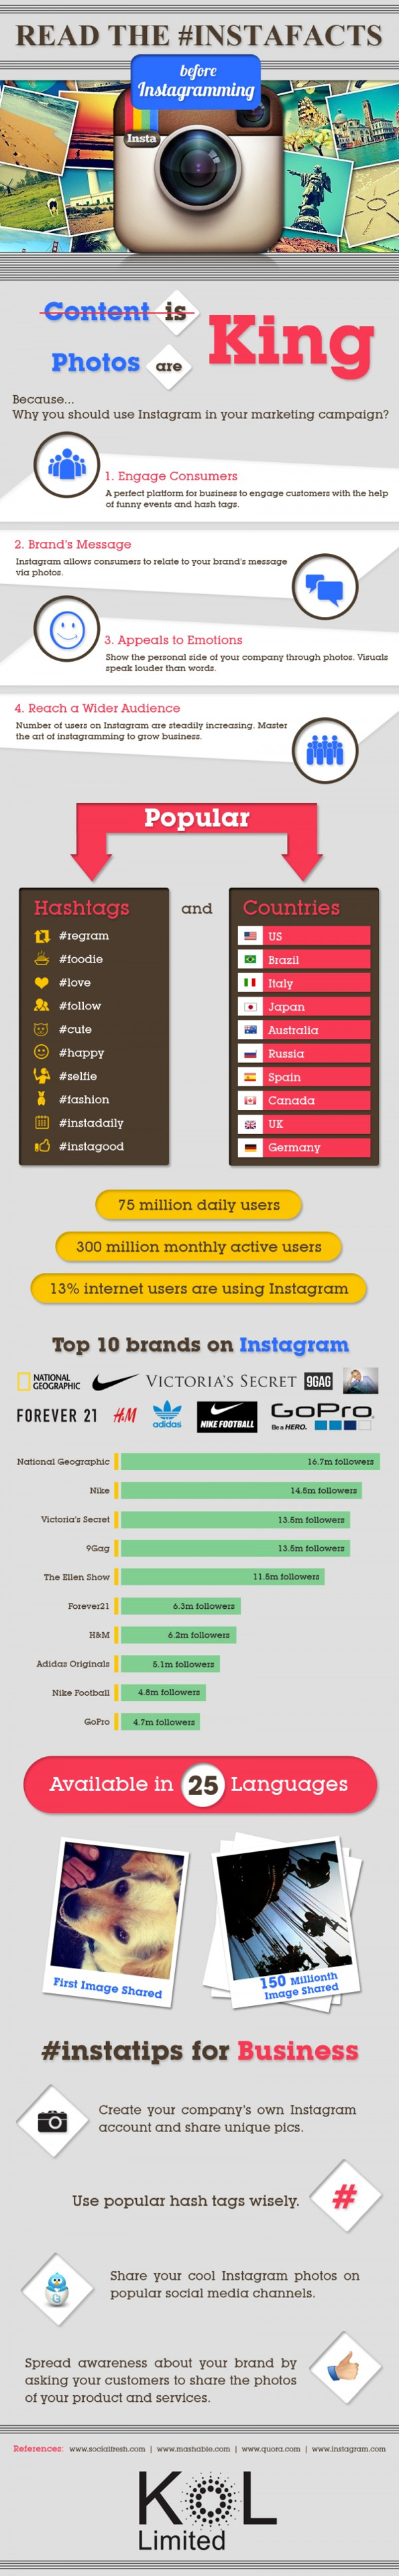 Why Instagram is Good for Business Infographic image